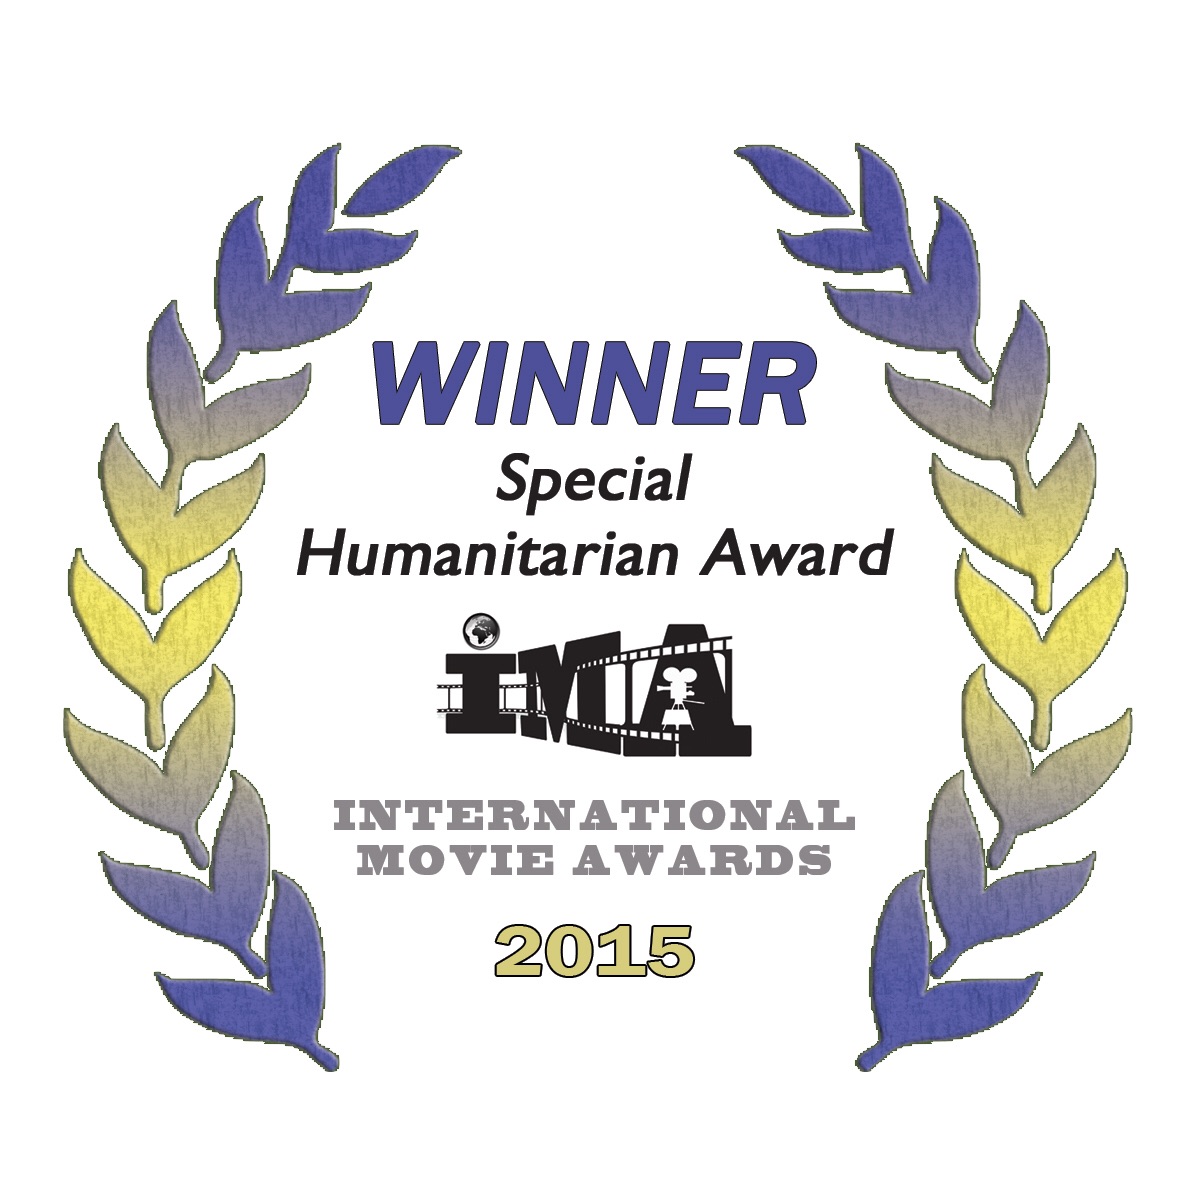 Veronica Grey and Leonardo DiCaprio receive the Special Humanitarian Award from the 2015 International Film Awards for 